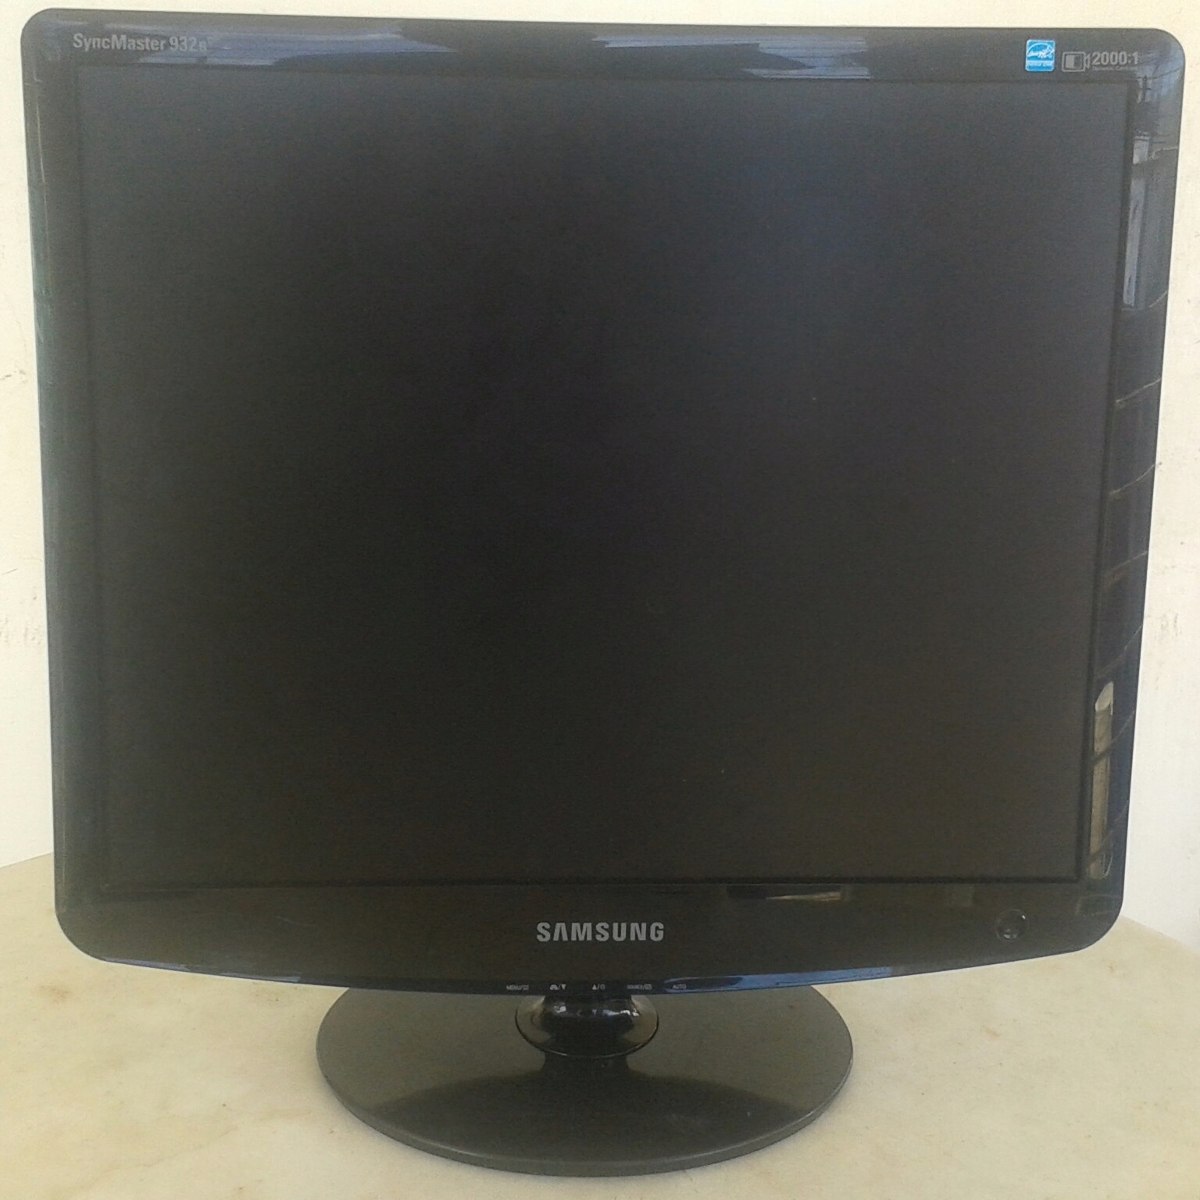 Samsung syncmaster 943bw driver for mac